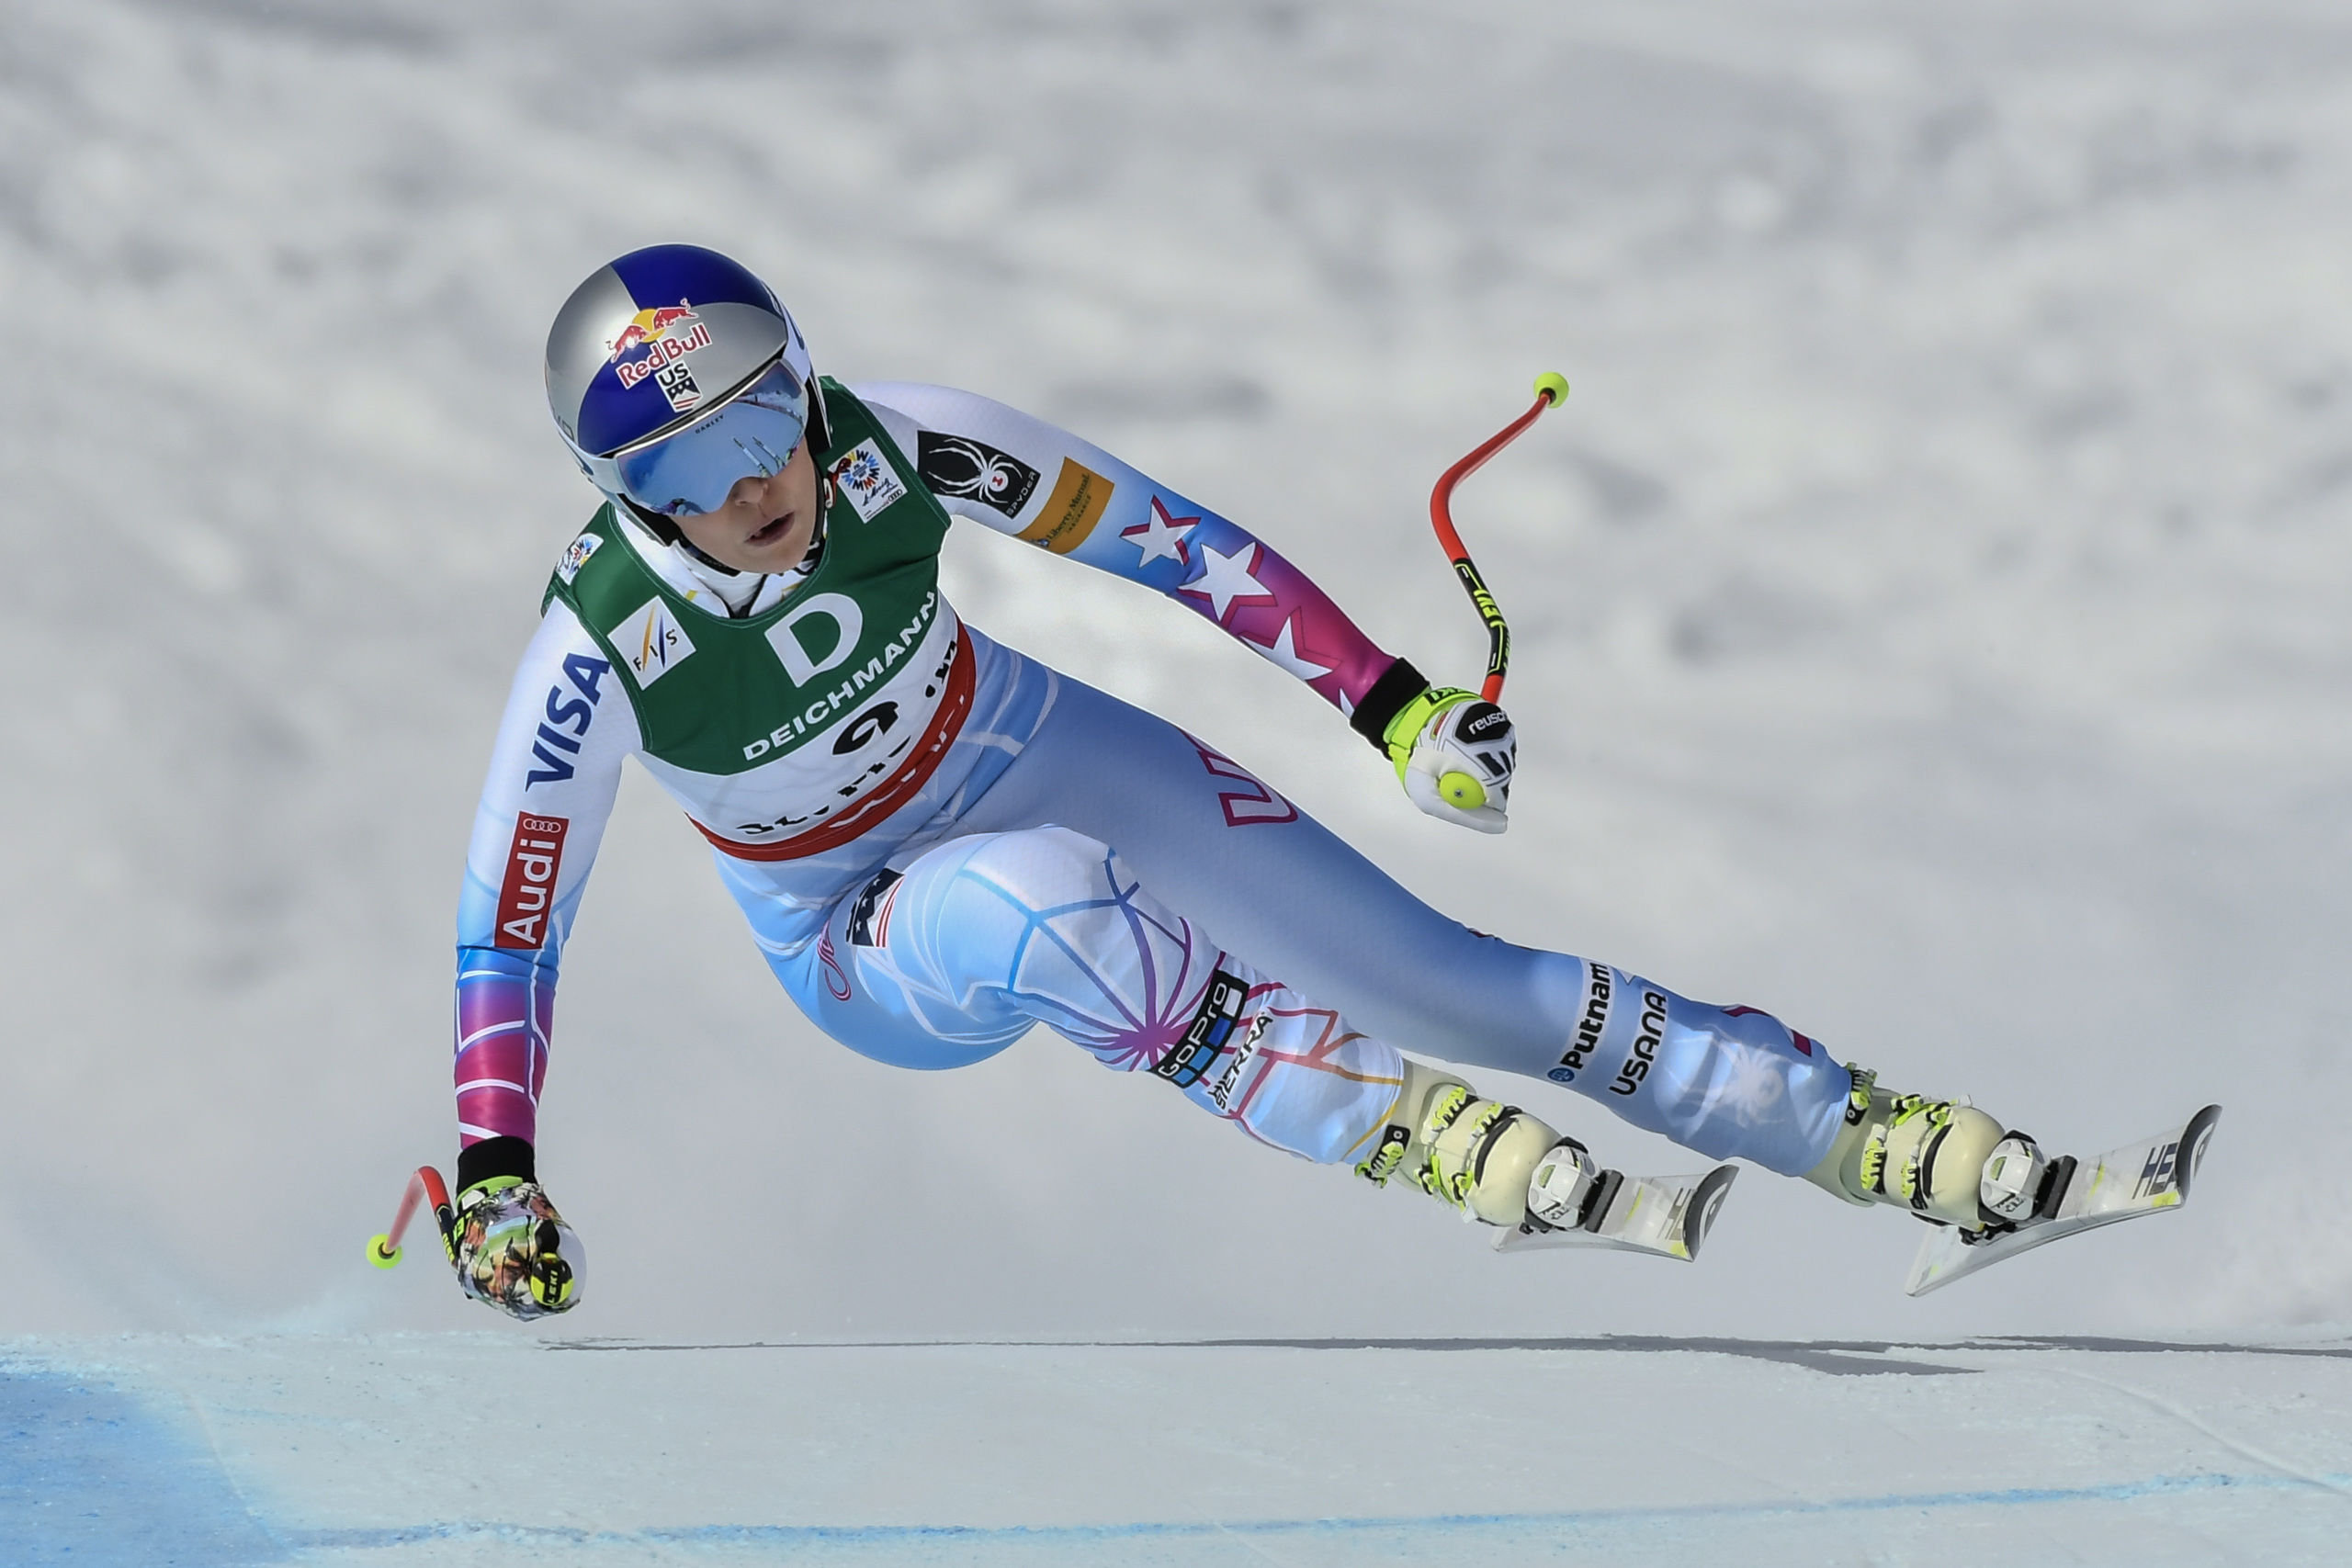 ST MORITZ - February 12, 2017: Lindsey VONN (USA) competing in the women's downhill event at the FIS Alpine World Ski Championships at St Moritz, Switzerland. 20170212_SLB_6482